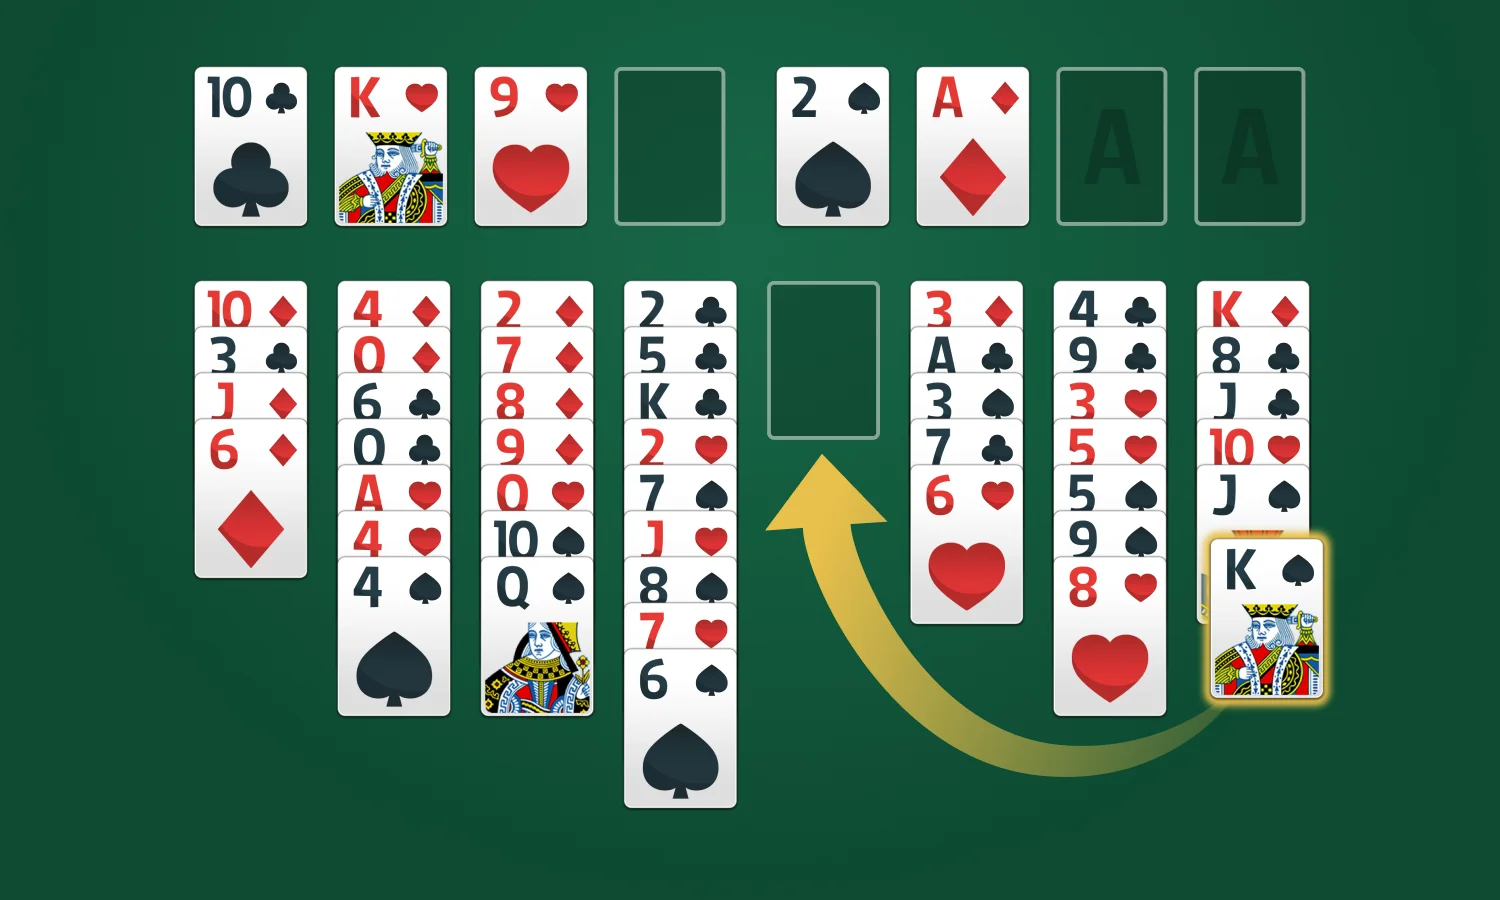 FreeCell Solitaire Rules: Step 4